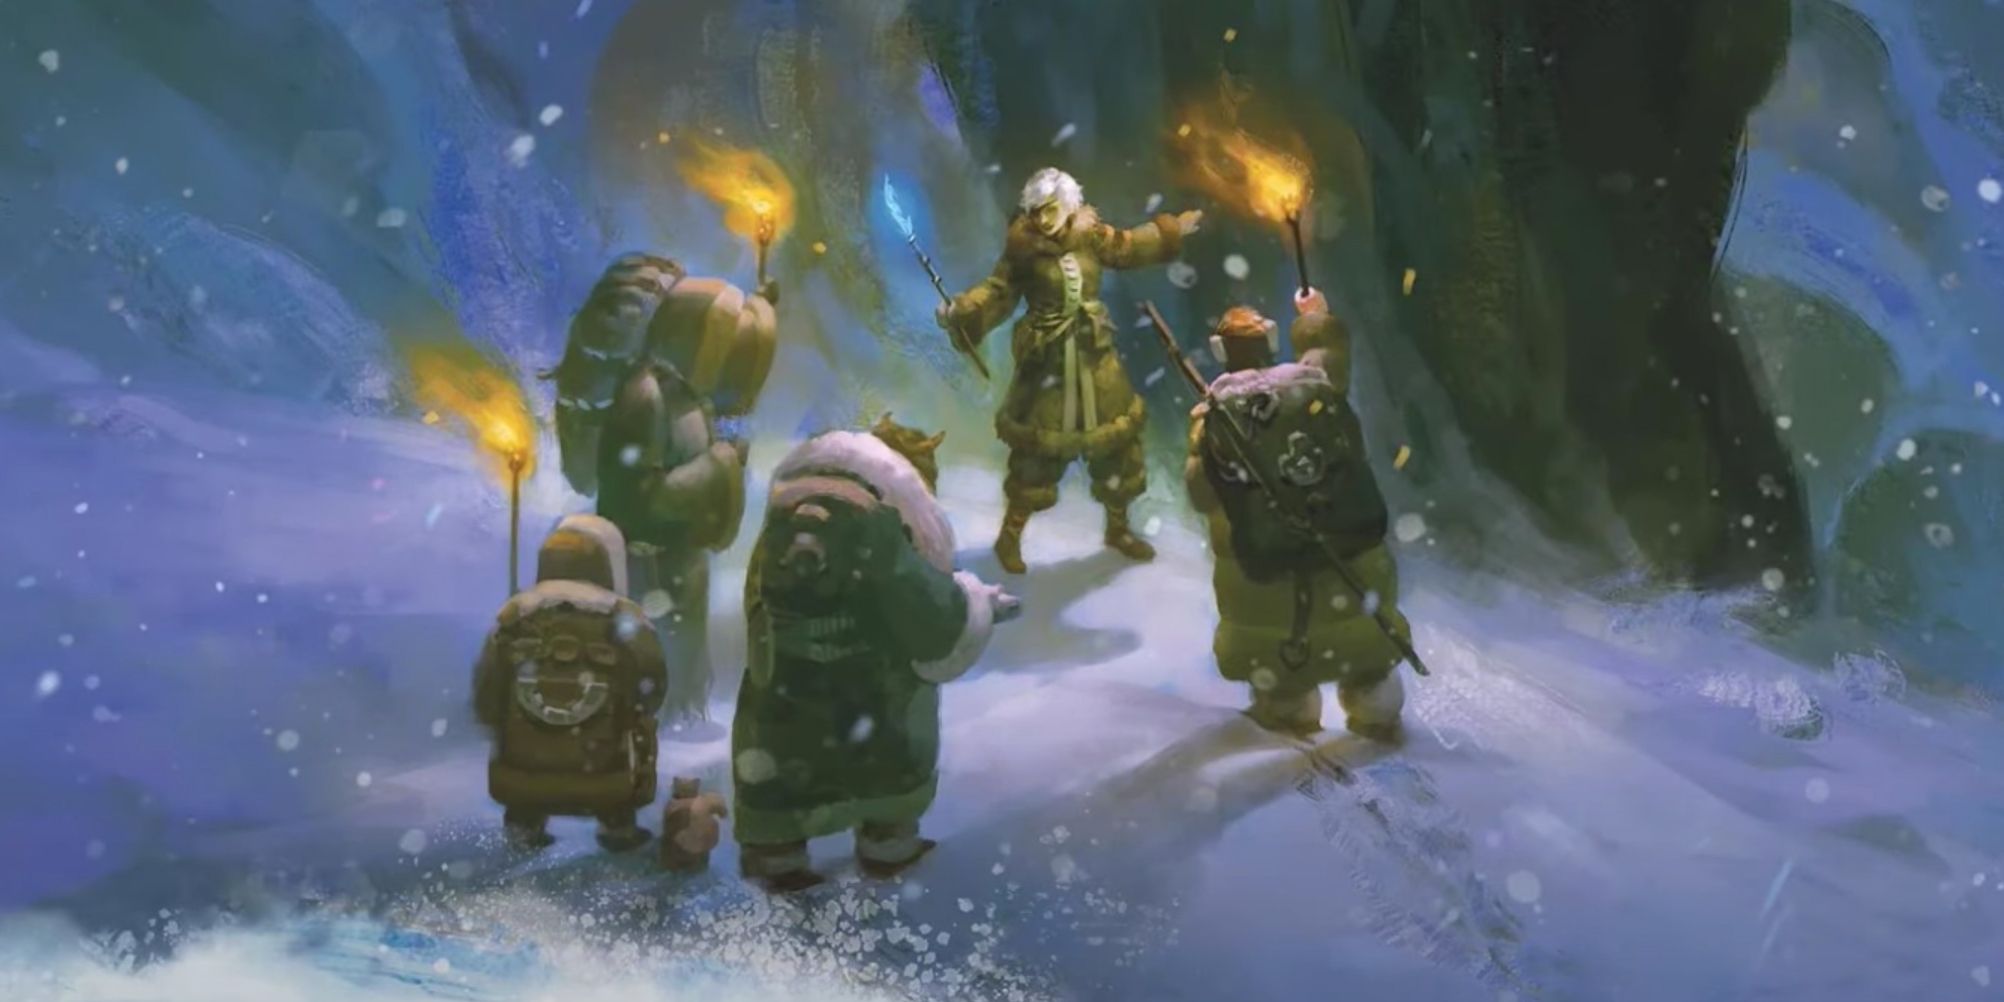 Vellynne Harpell leads the party into the Caves of Hunger in Icewind Dale: Rime of the Frostmaiden, the newest Dungeons &amp; Dragons adventure.